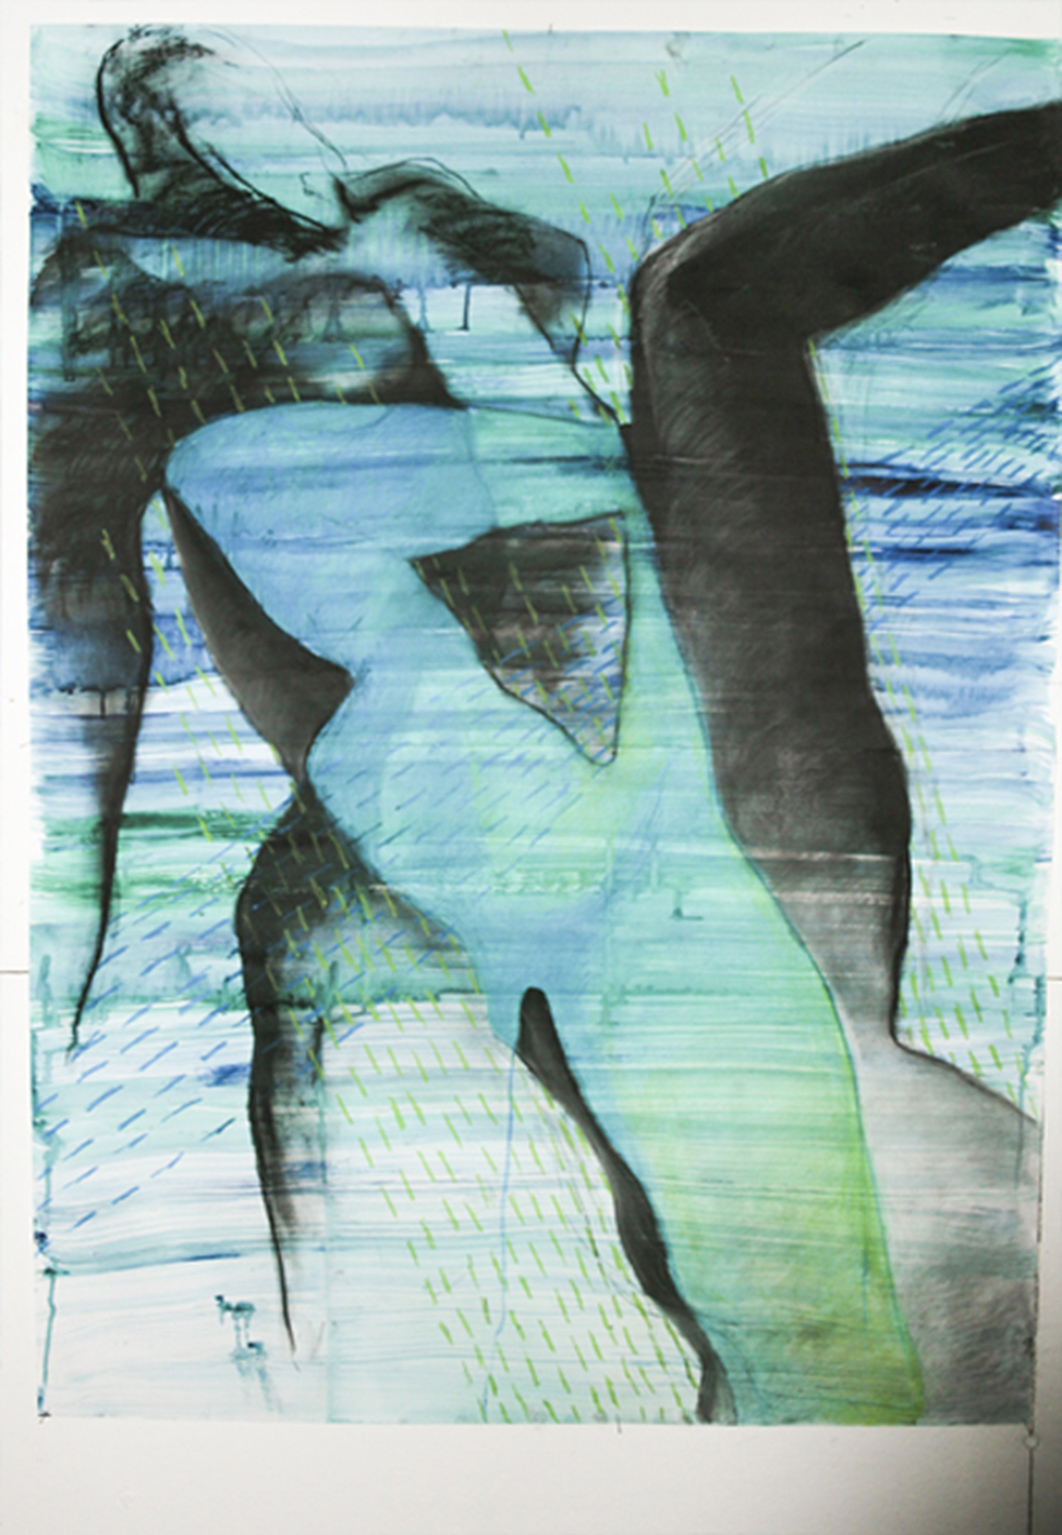 drawings, abstract, aesthetic, expressive, figurative, illustrative, portraiture, bodies, sexuality, blue, green, white, acrylic, charcoal, paper, abstract-forms, beautiful, contemporary-art, copenhagen, decorative, design, interior, interior-design, modern, modern-art, nordic, nude, pretty, scandinavien, Buy original high quality art. Paintings, drawings, limited edition prints & posters by talented artists.